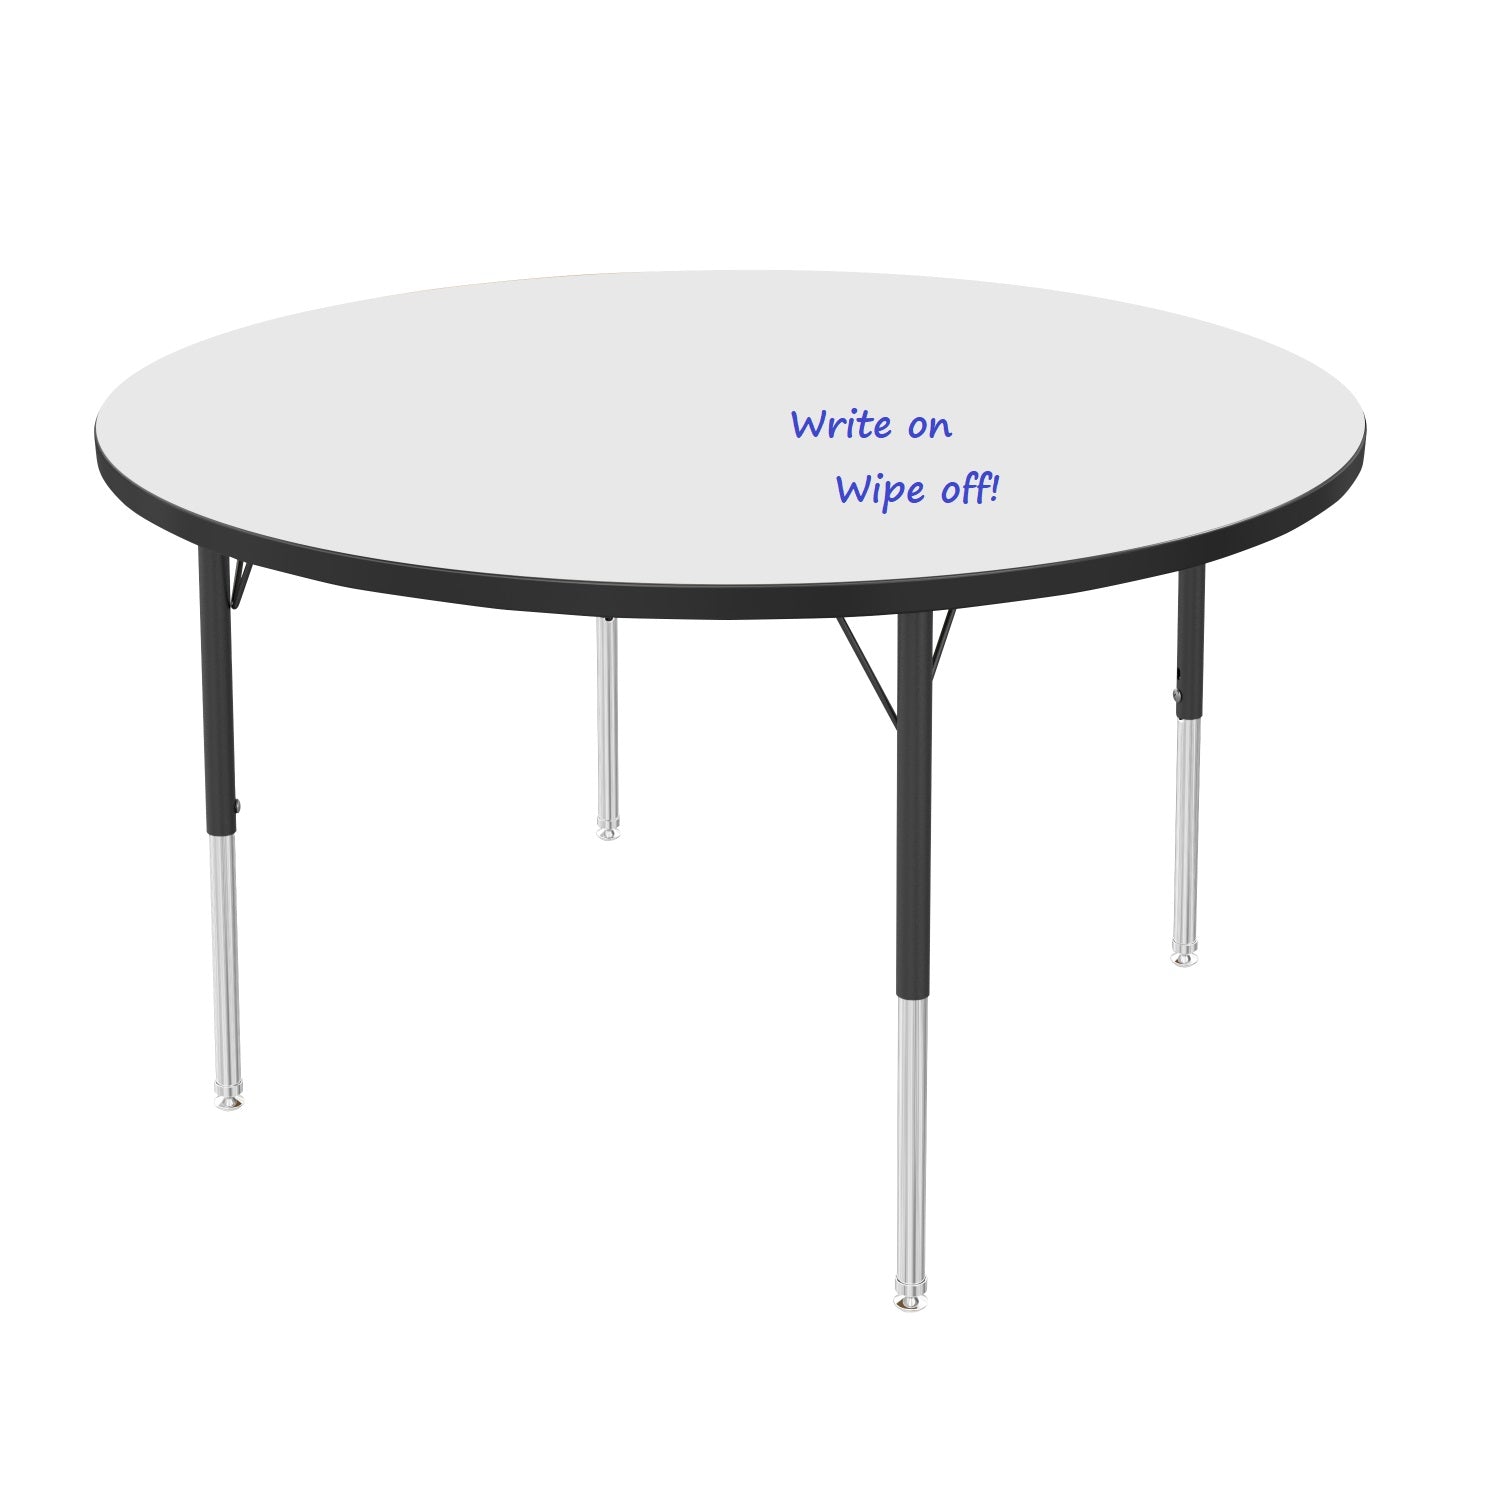 MG Series Adjustable Height Activity Table with White Dry Erase Markerboard Top, 60" Round